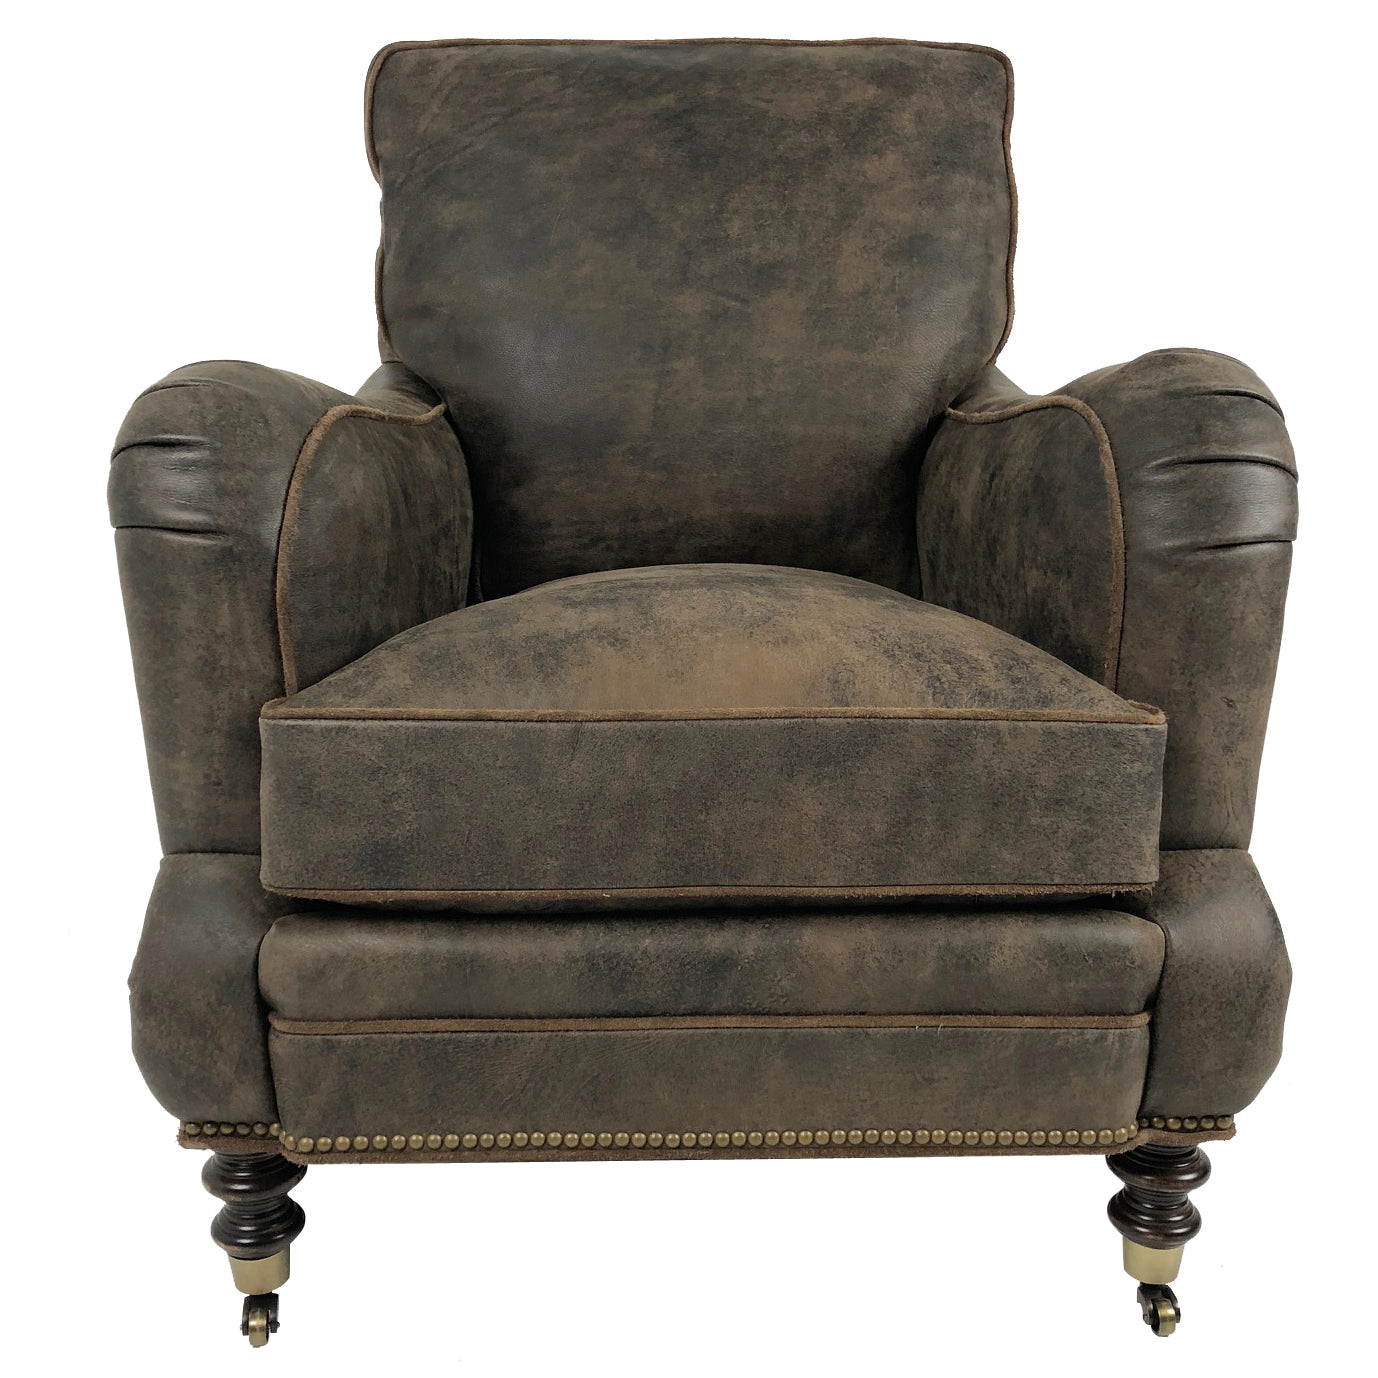 Hartwell Leather Chair in Zulu Chocolate by Wesley Hall - front view